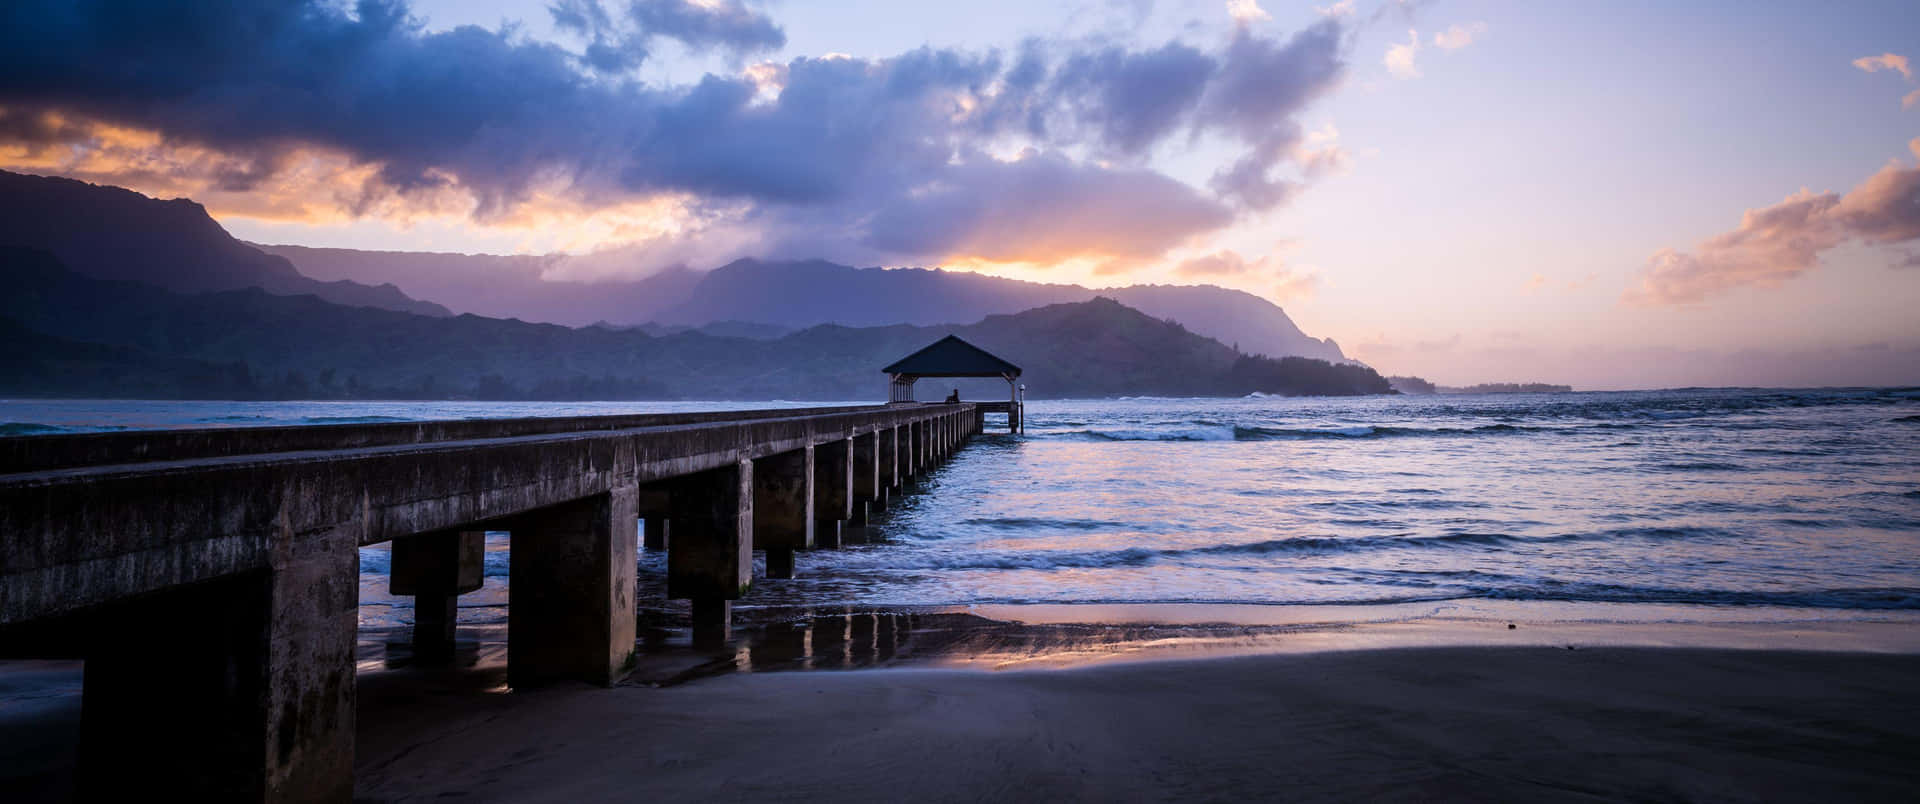 A Pier With A Sunset View Over The Ocean Wallpaper